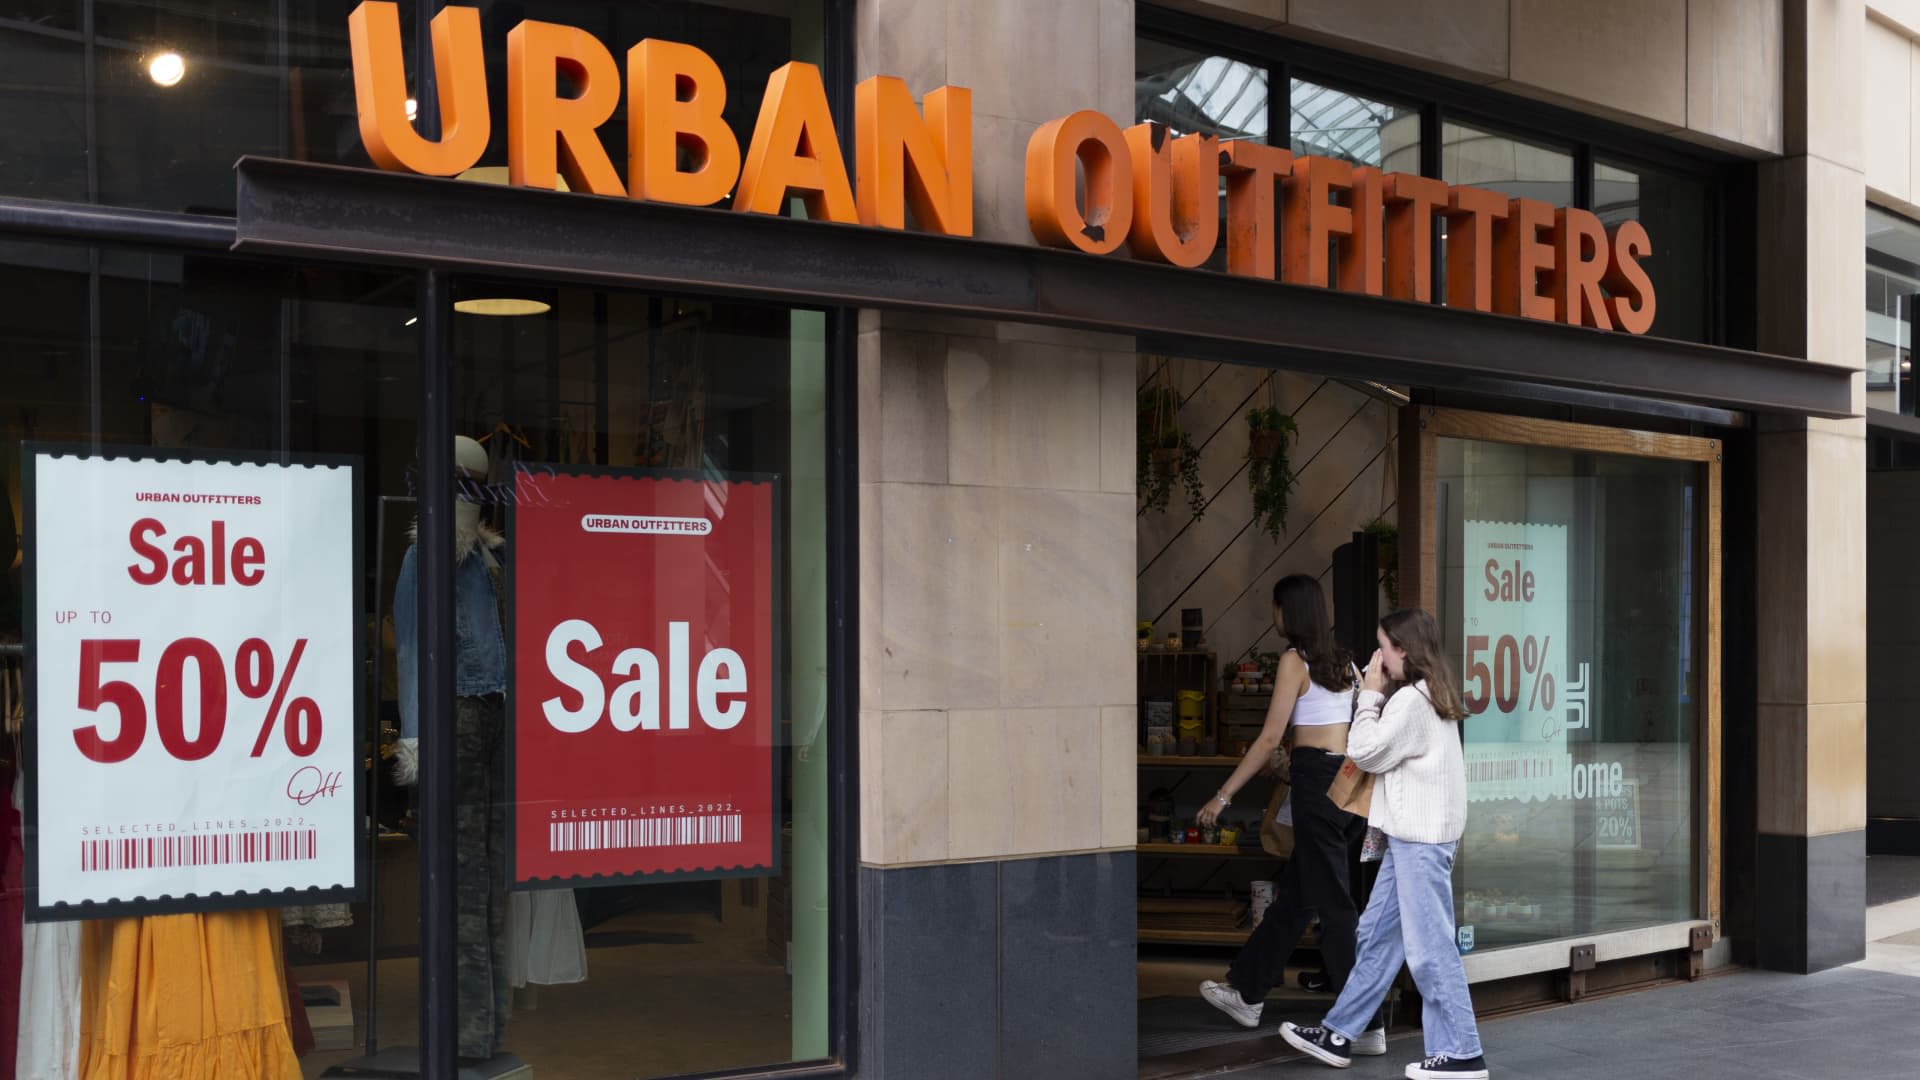 Stocks making the biggest moves after hours: Urban Outfitters, Viasat, Toll Brothers and others